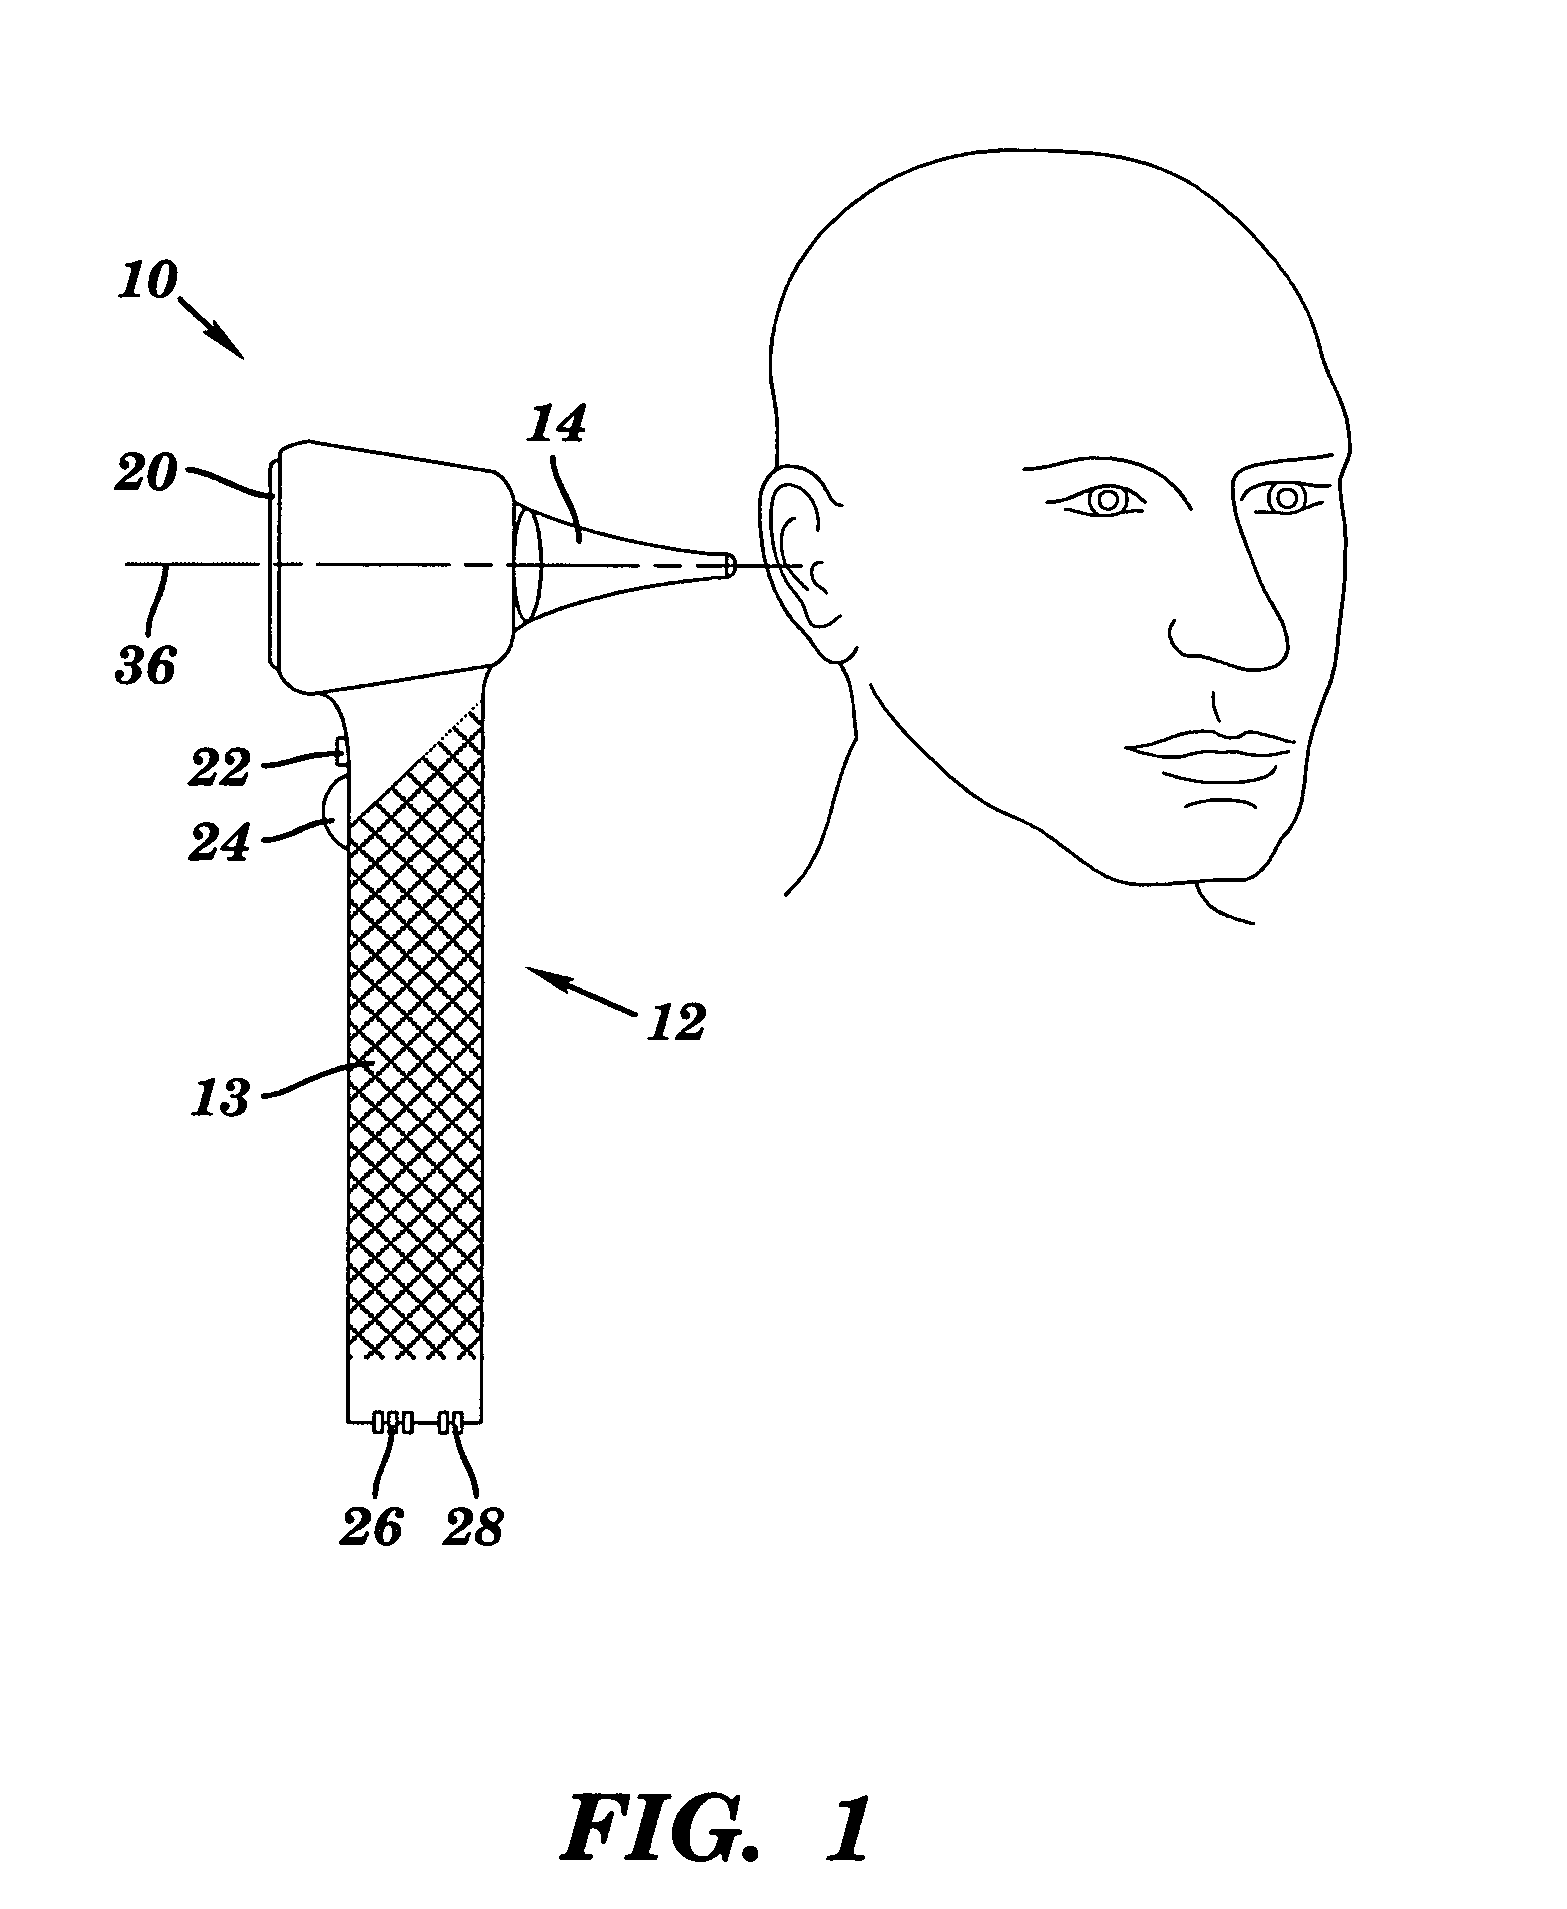 Medical inspection device